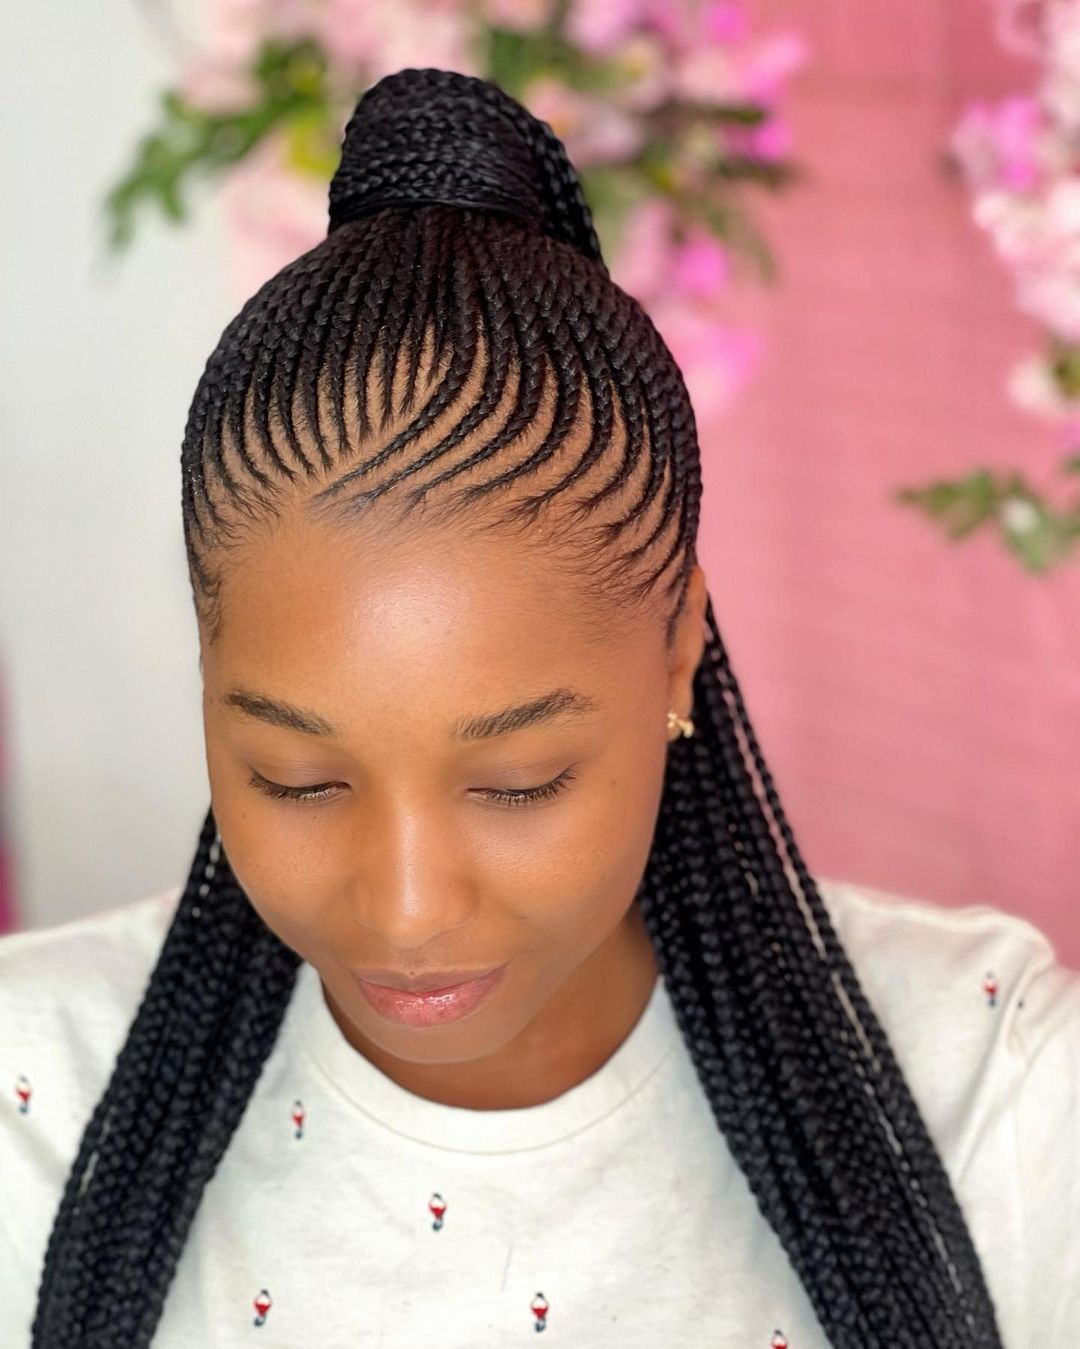 40 Trending African Hairstyles for Women to Check Out Today